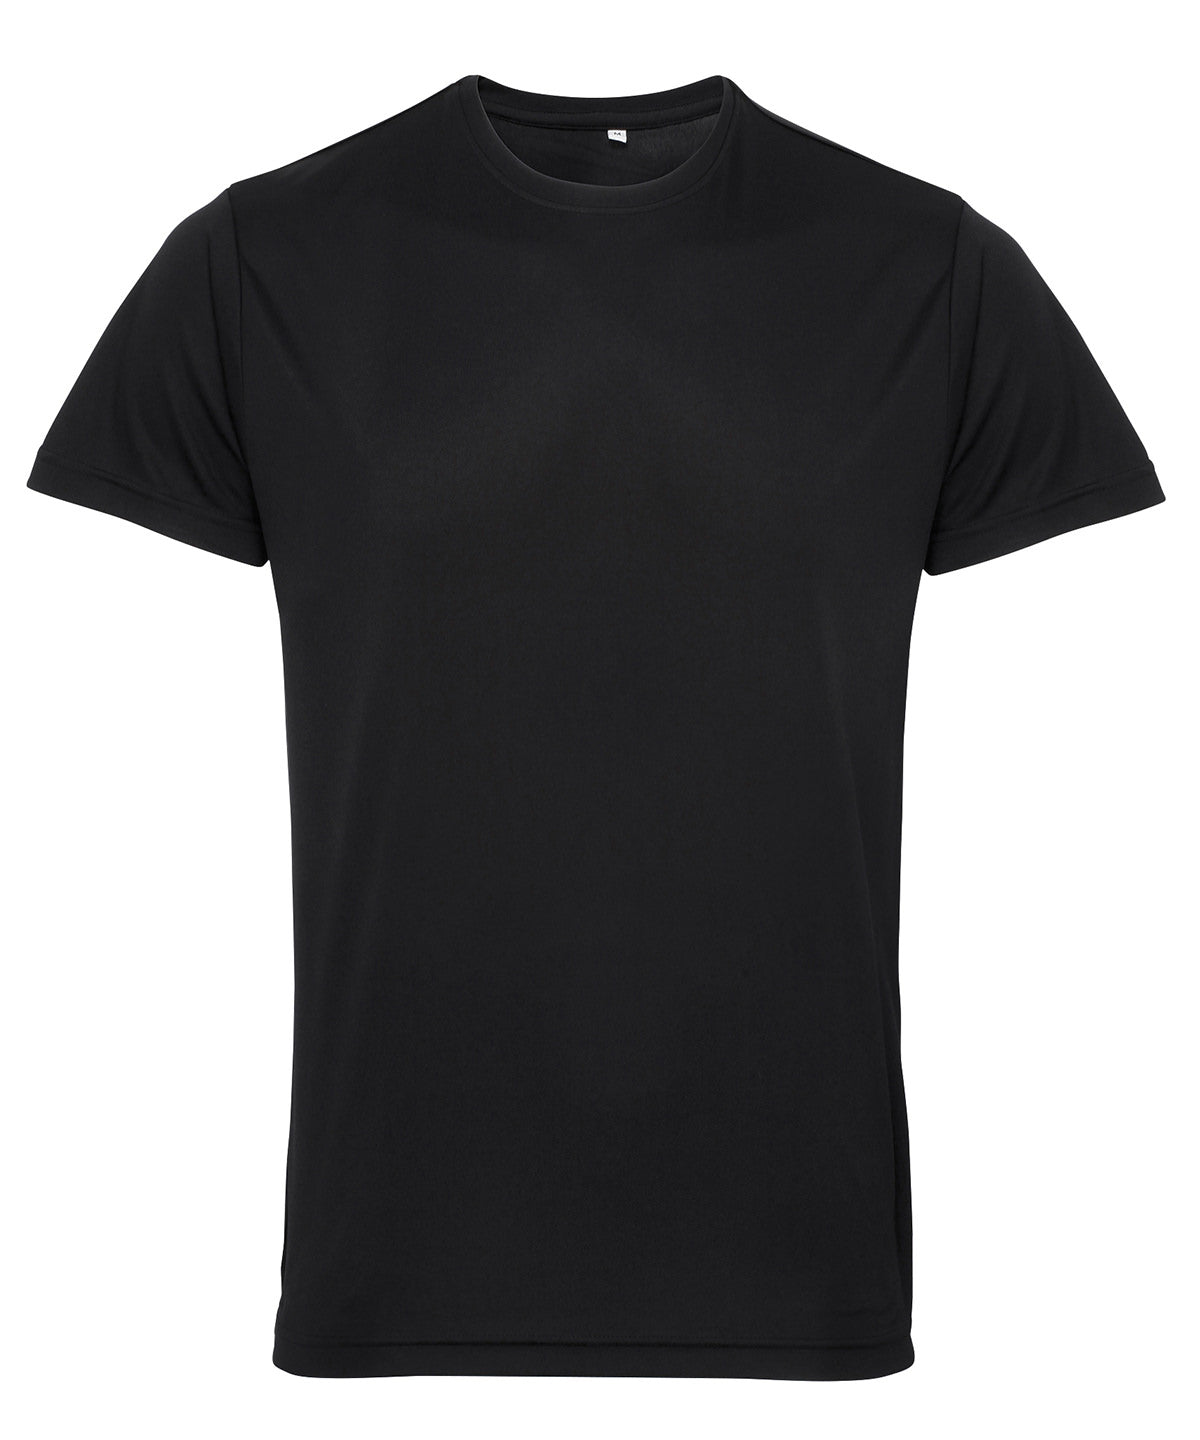 Recycled Performance T-Shirt (Mens/Unisex)